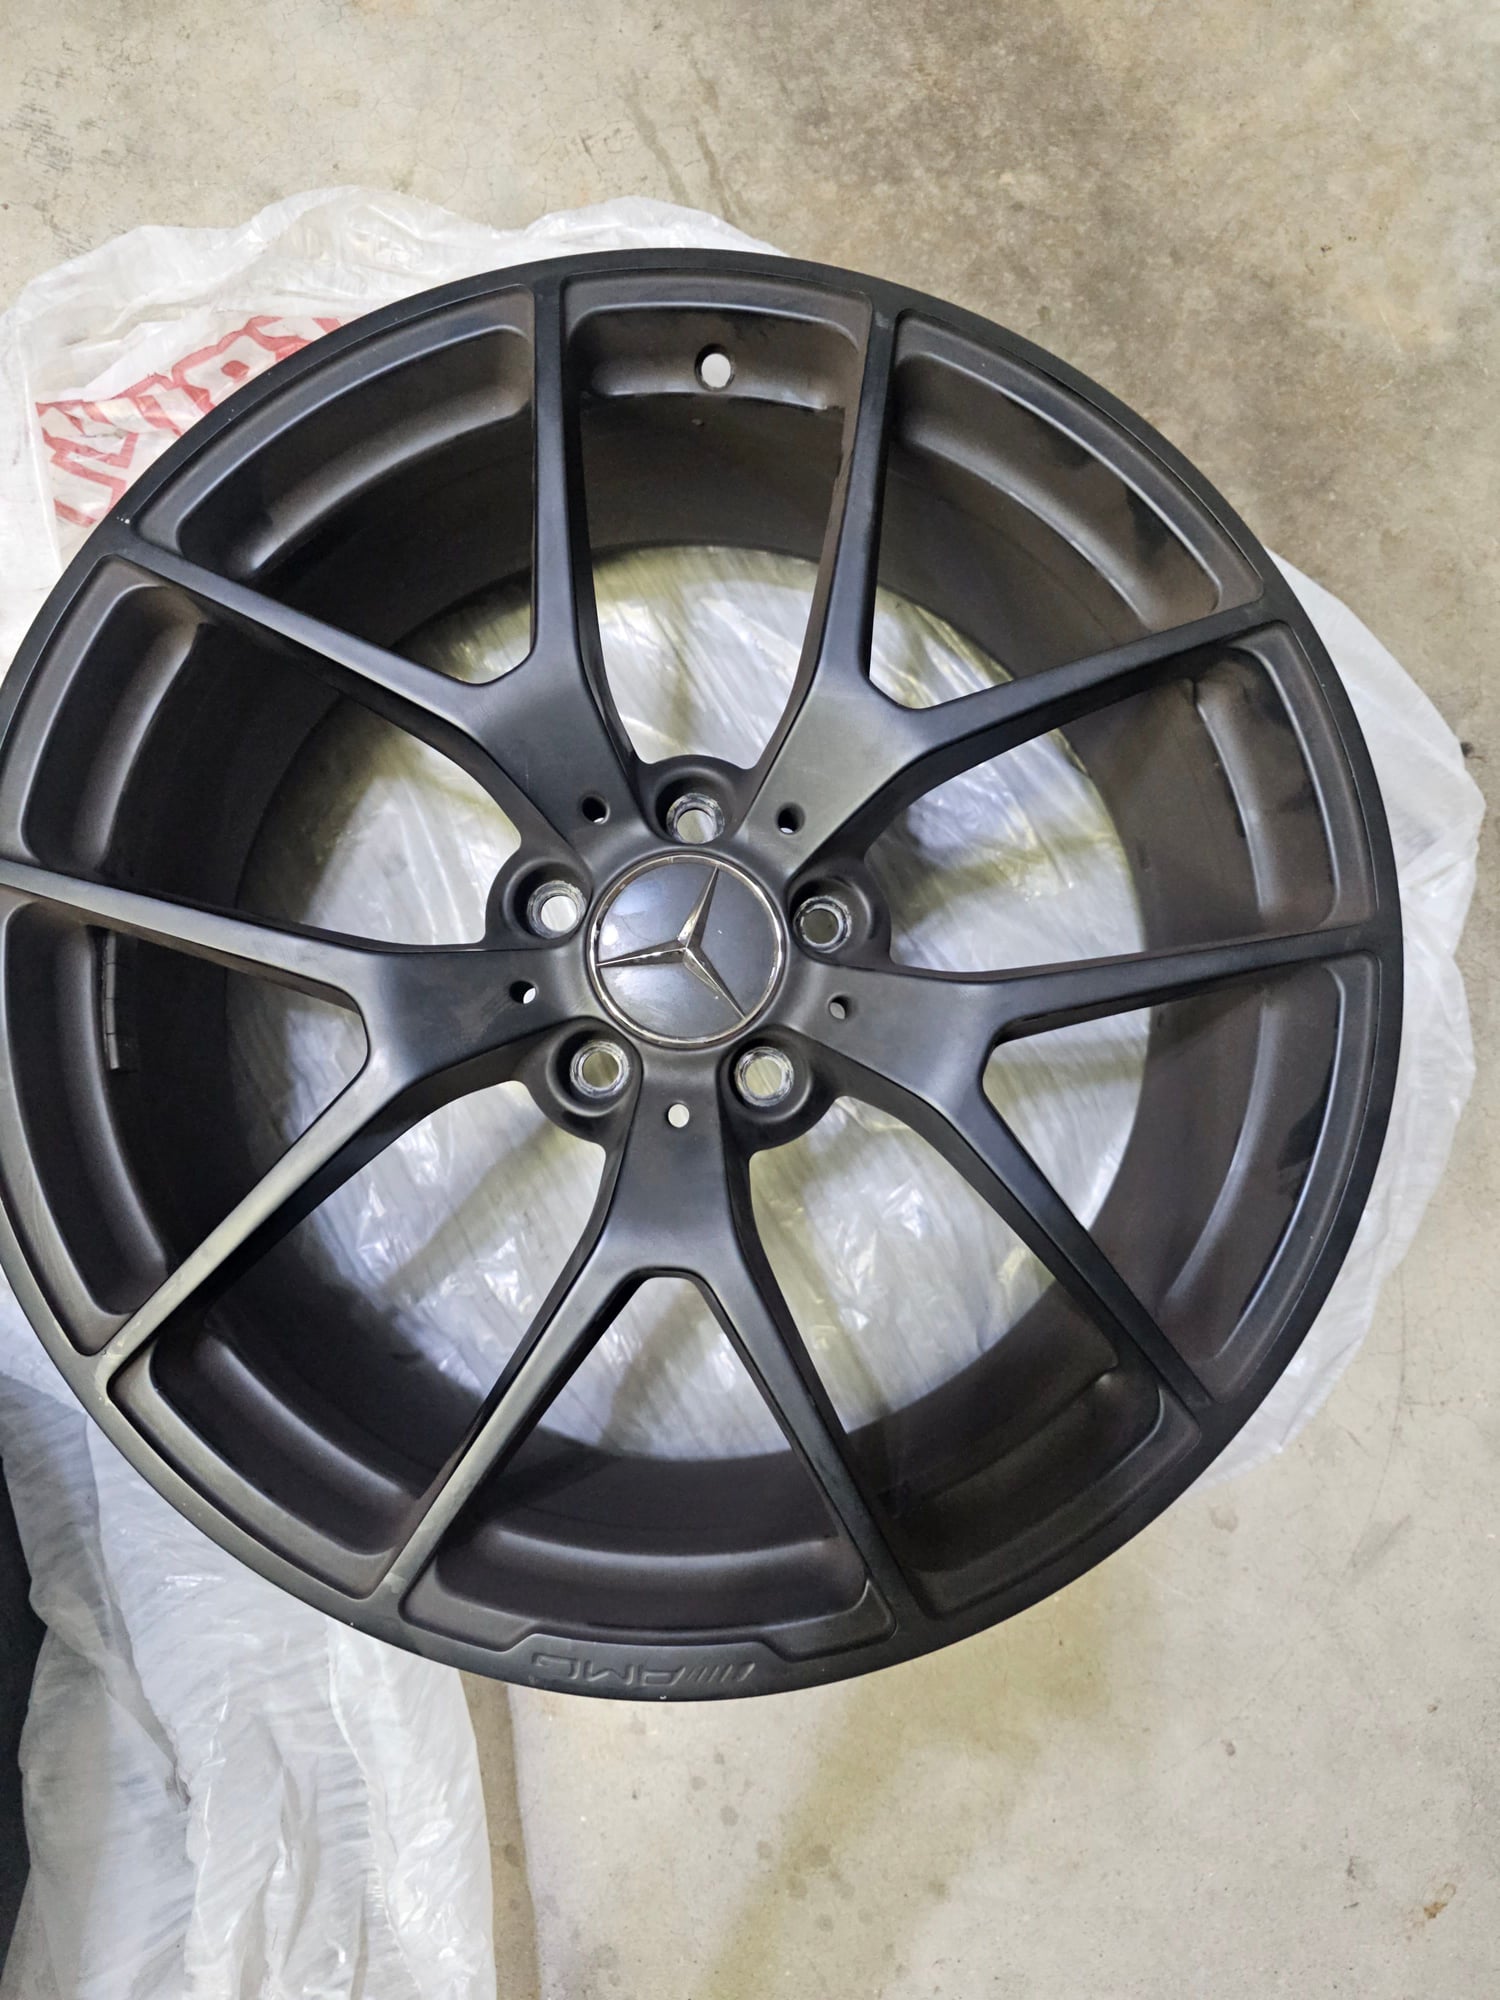 Wheels and Tires/Axles - FS: OEM 2015 C63 507 wheels - Used - 2008 to 2015 Mercedes-Benz C63 AMG - Lithia Springs, GA 30122, United States